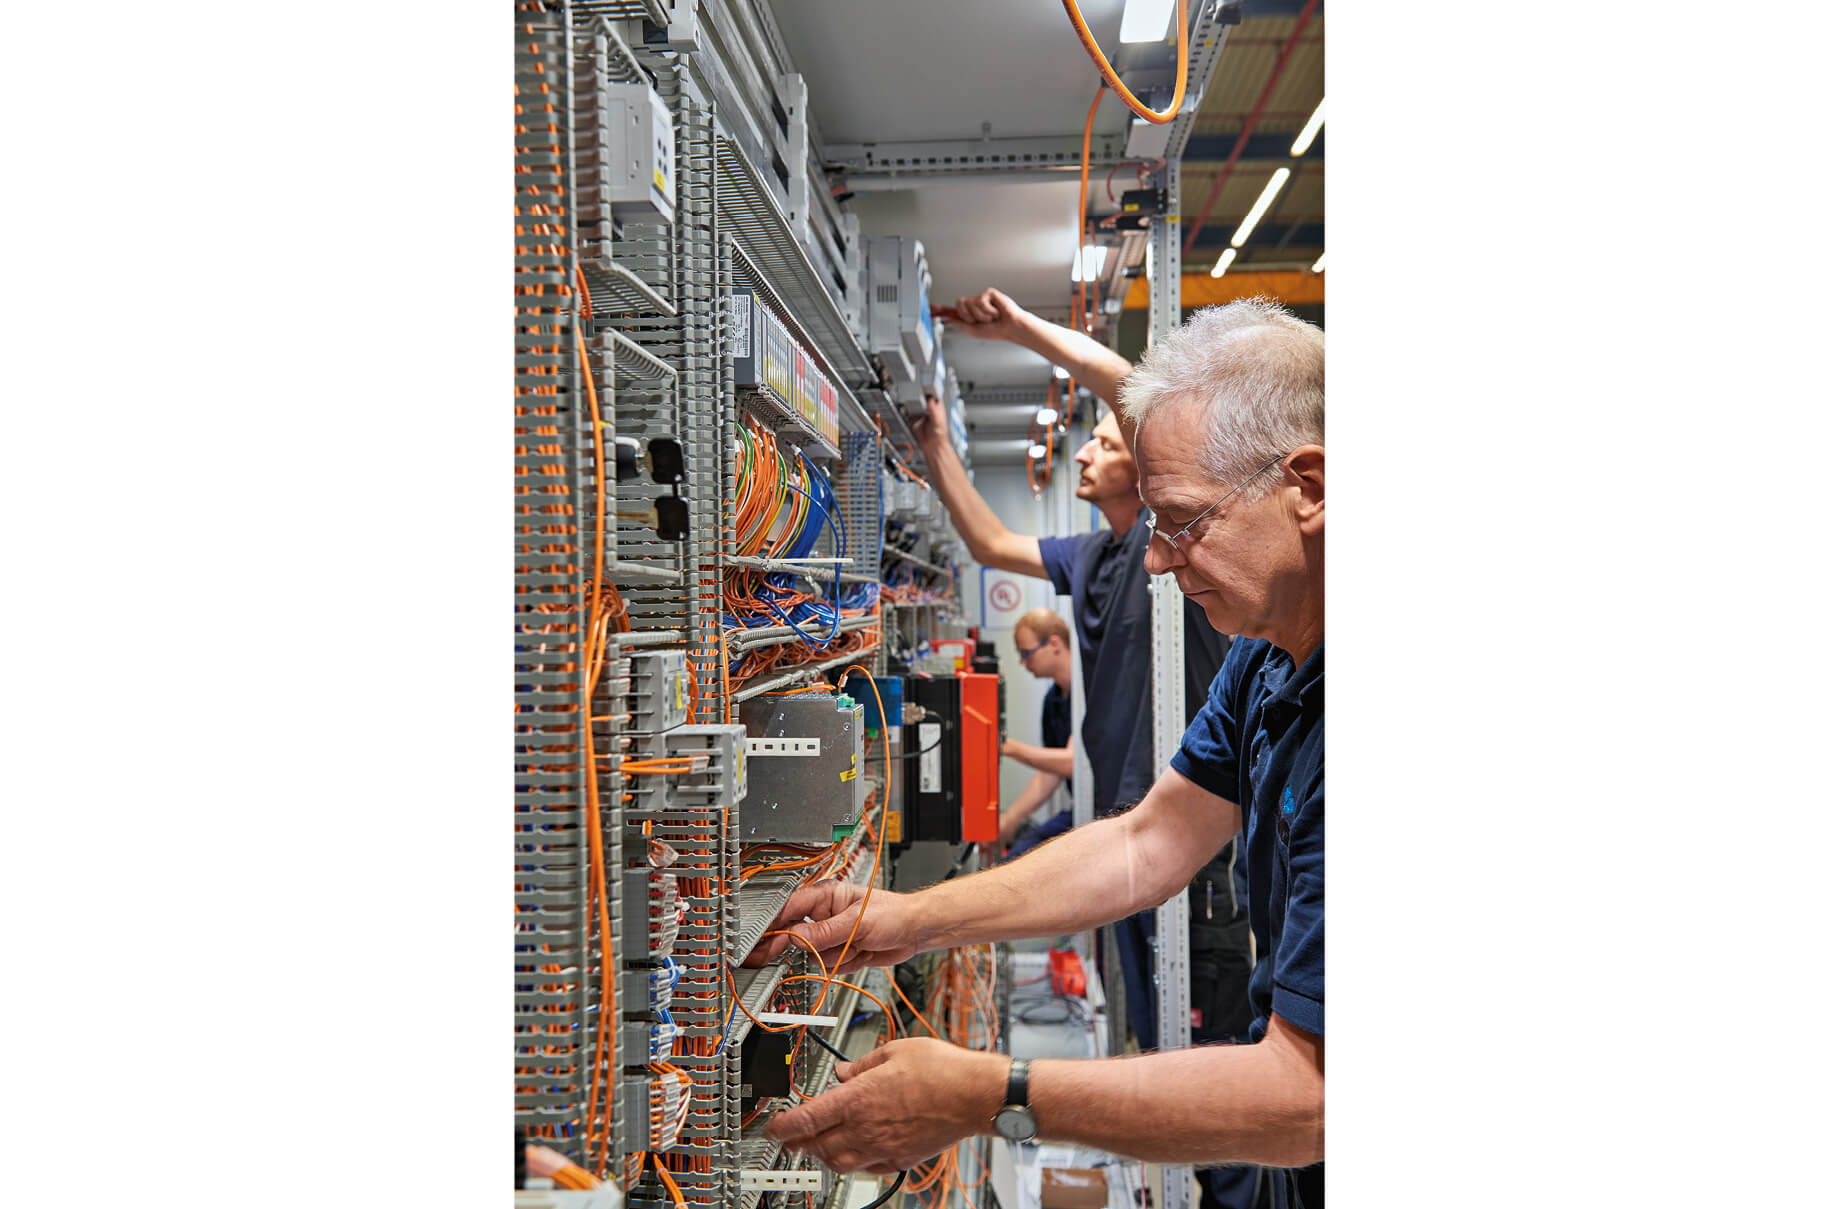 Expertise and productivity are the hallmarks of the control system and switchgear engineering company.